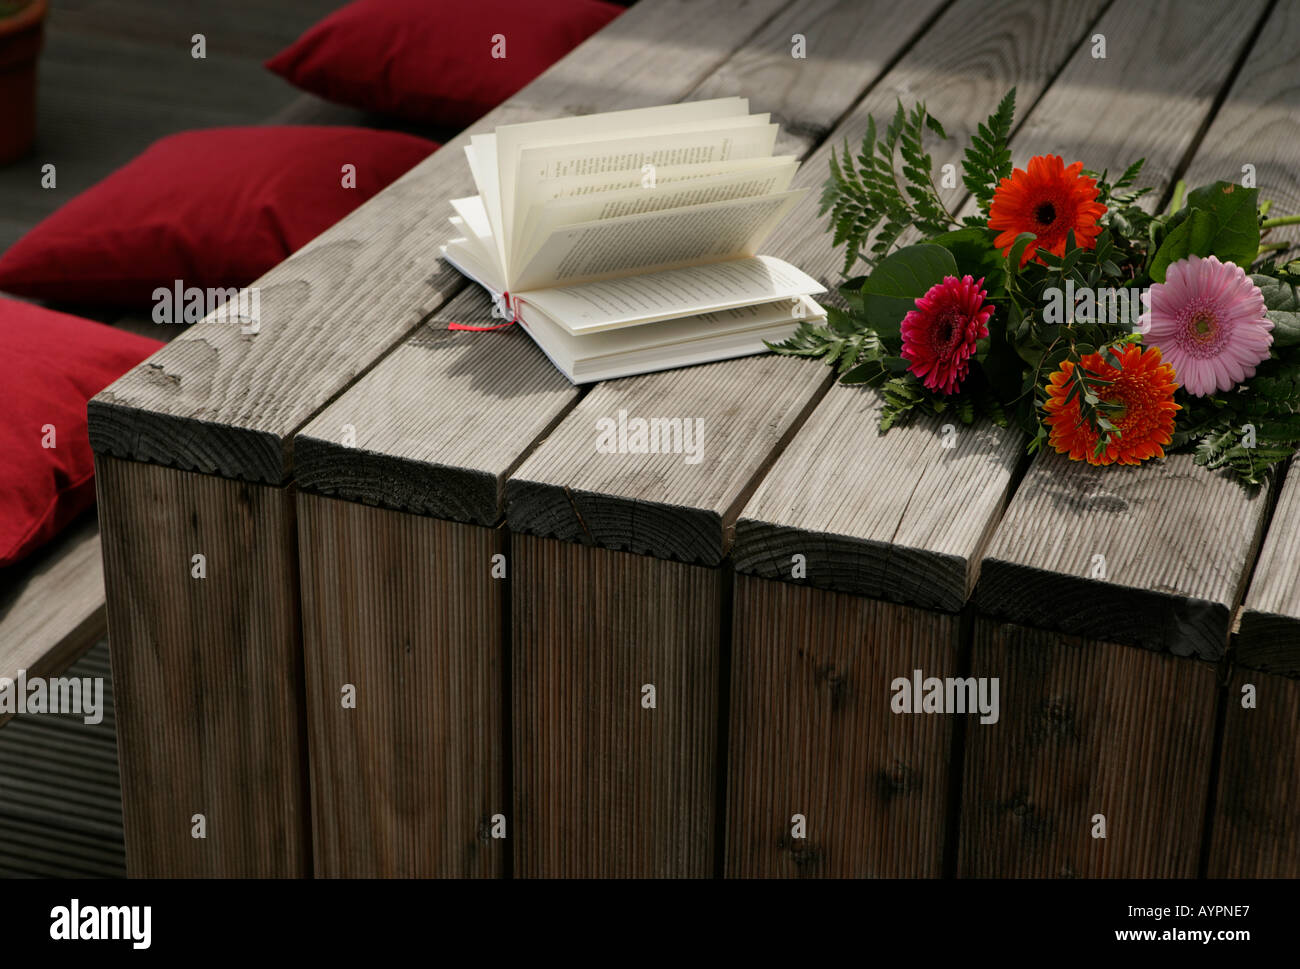 Bunch of flowers and a novel seen on a wooden table with some red cushions beside it Stock Photo